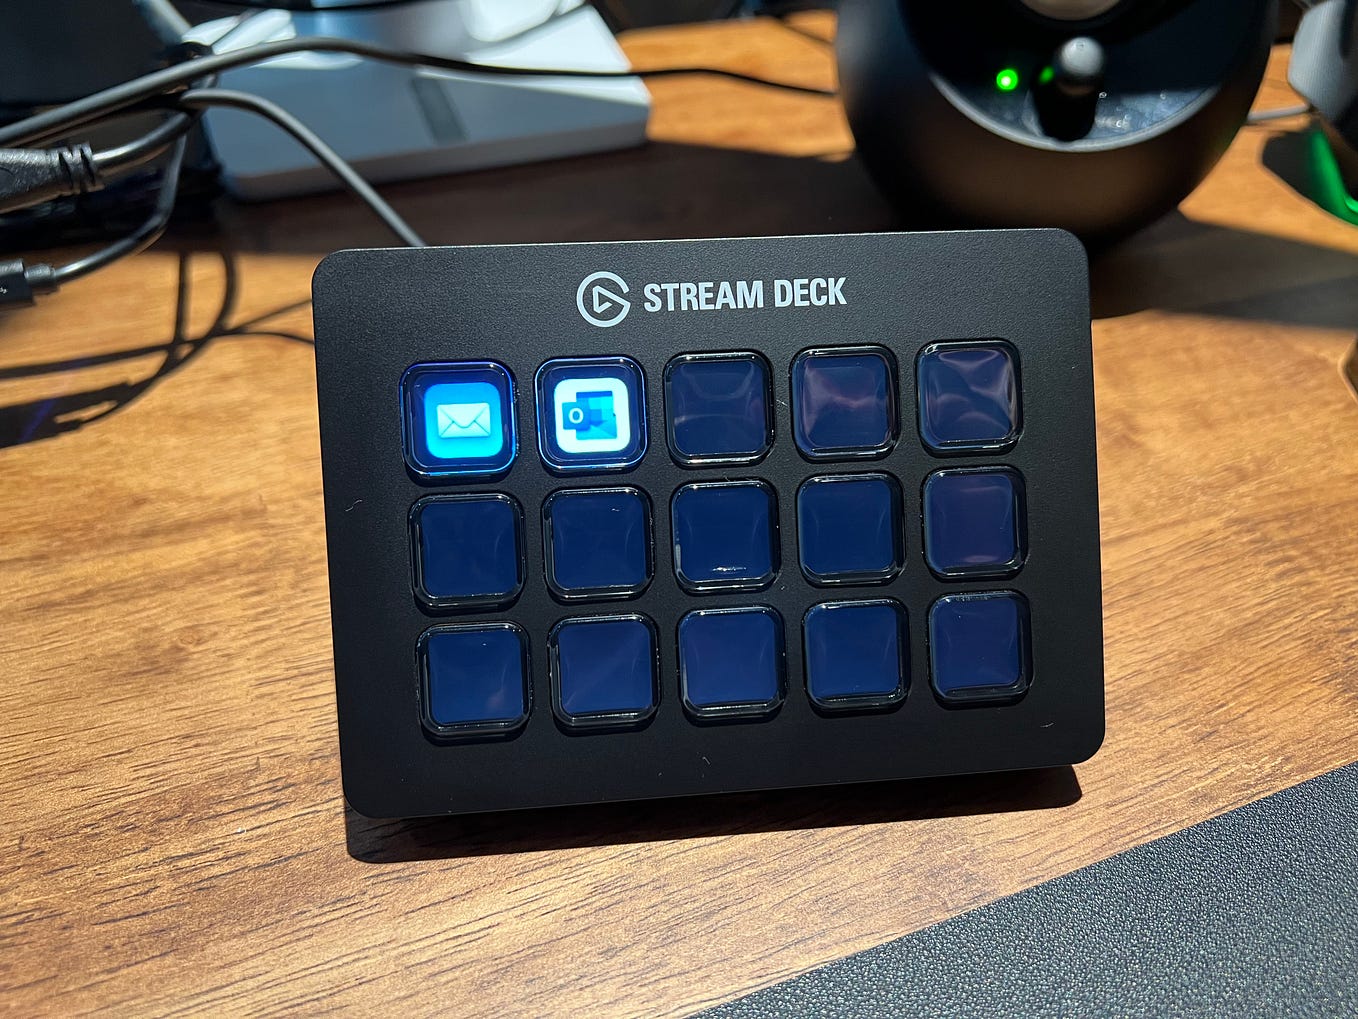 Better lighting with an Elgato Key Light and a Stream Deck - James Ridgway